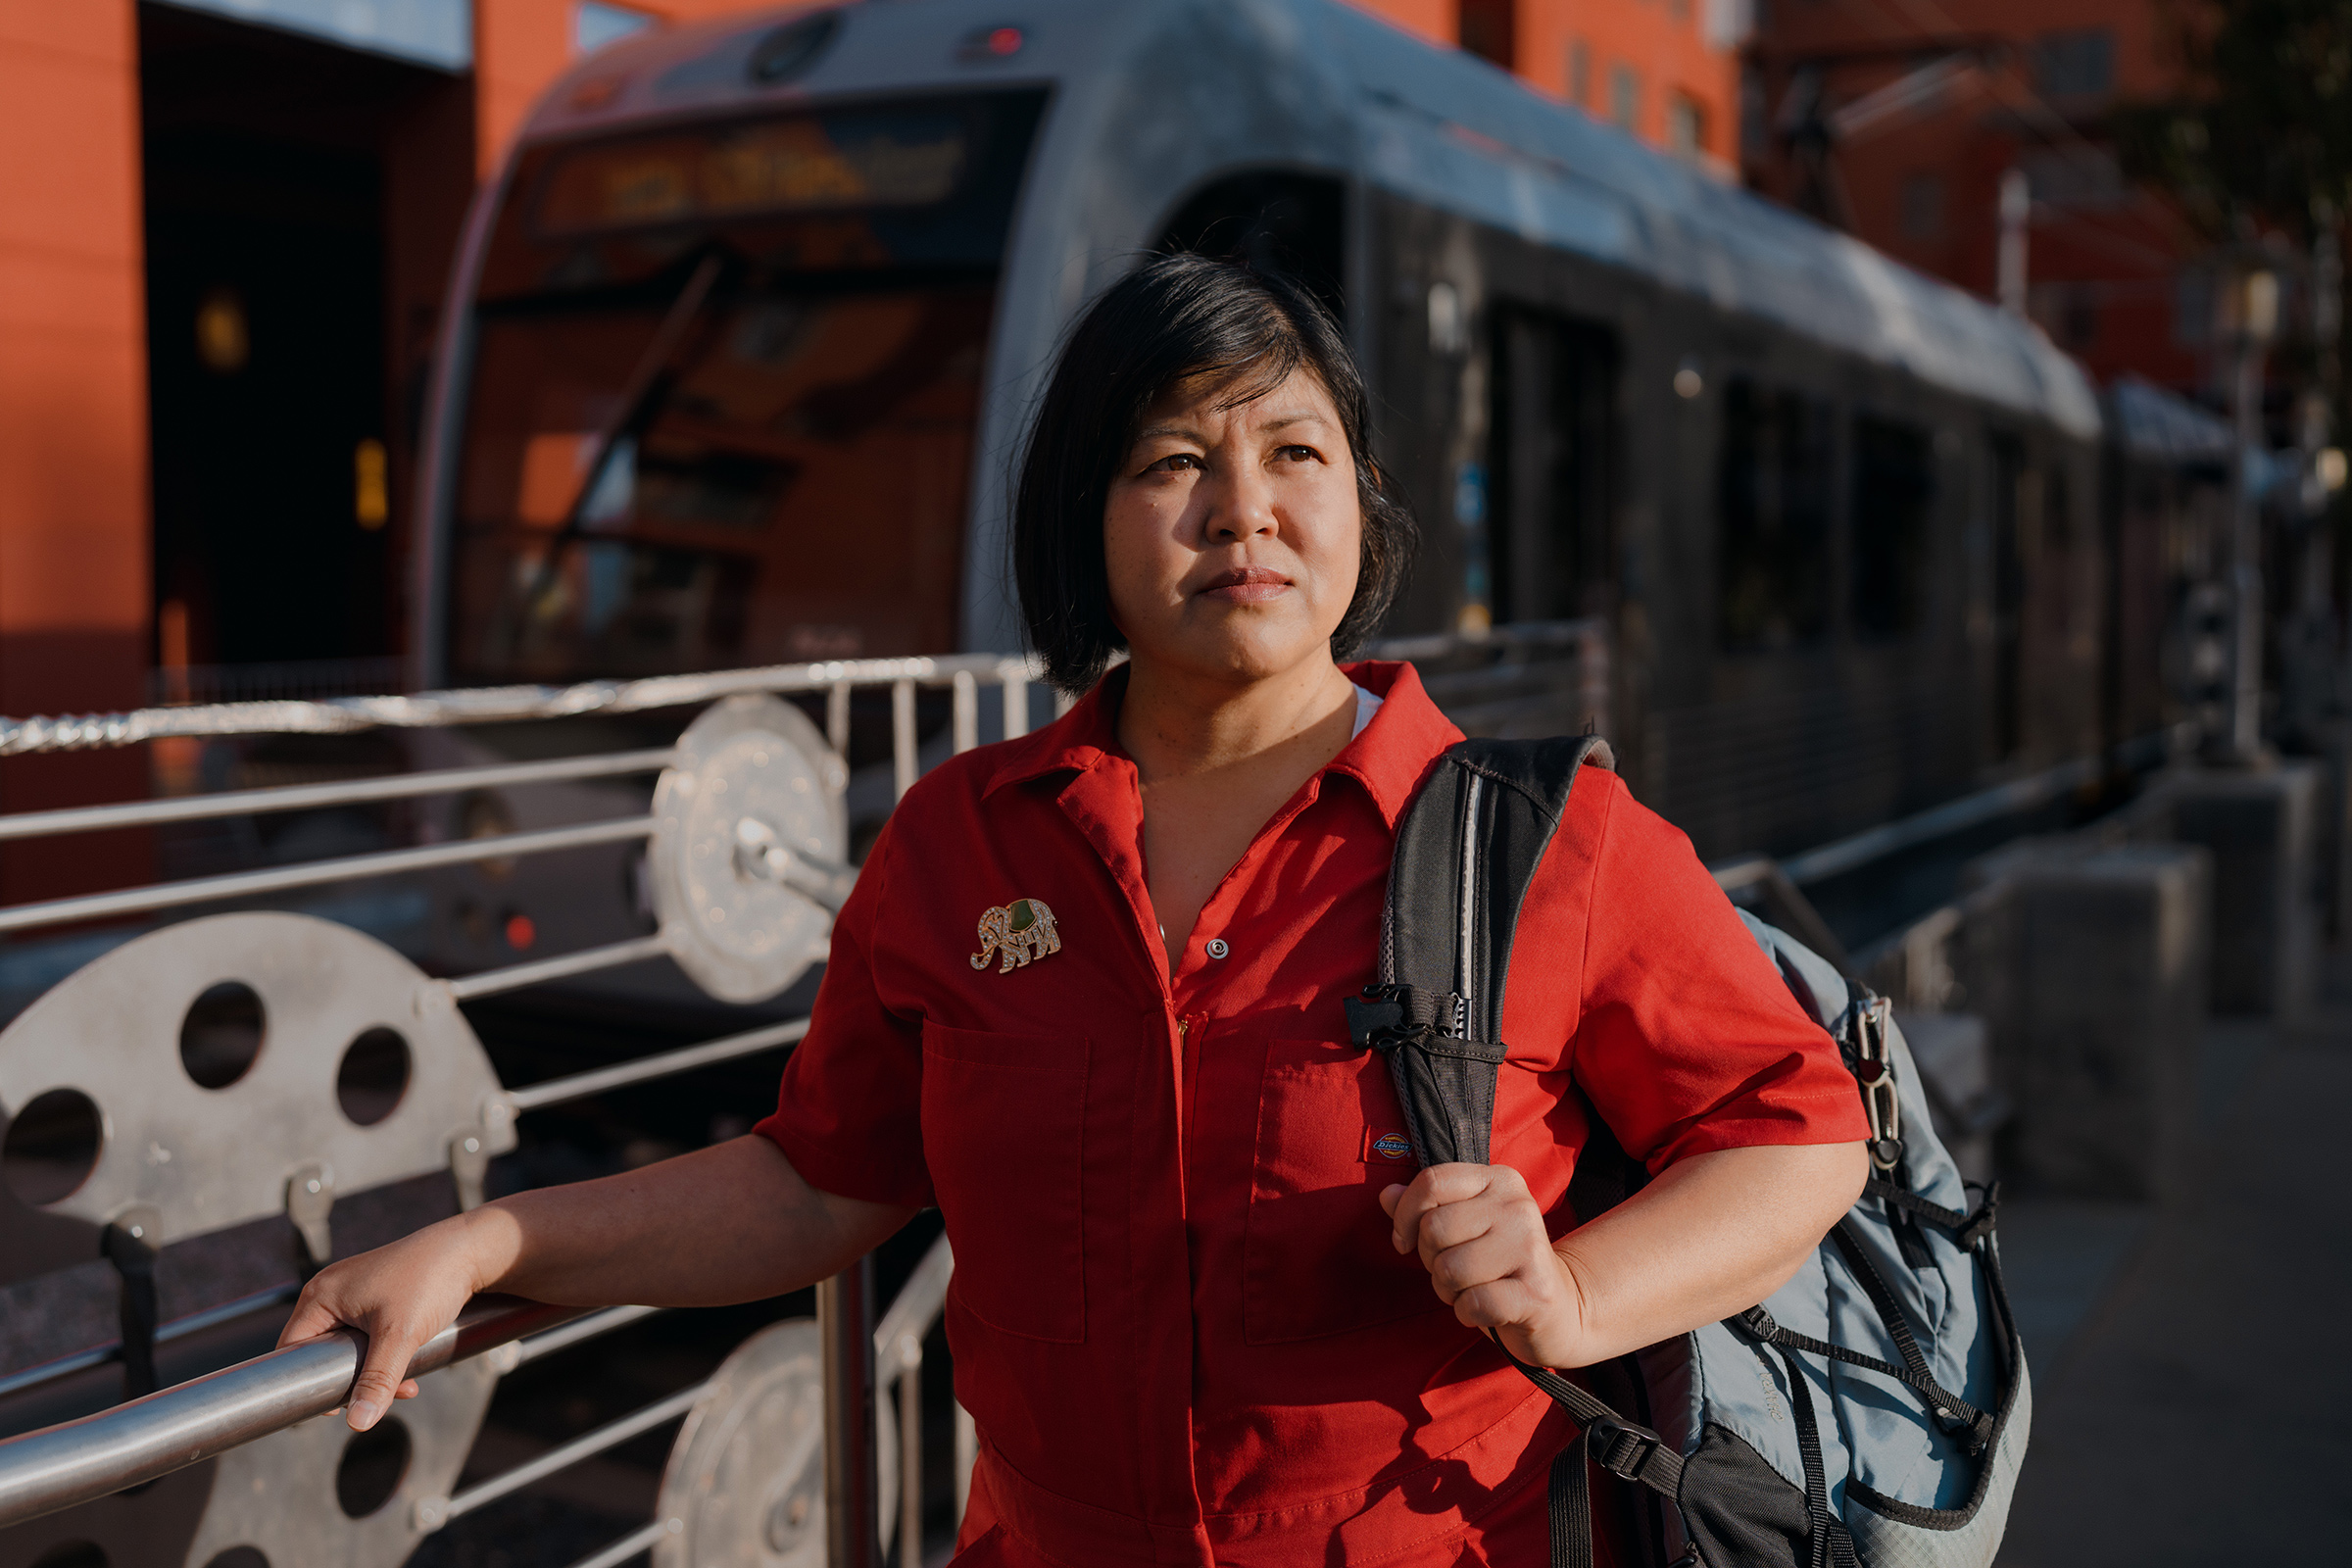 Tanny Jiraprapasuke stands at a Metro Gold Line station in Pasadena, Calif., on March 13, 2022.